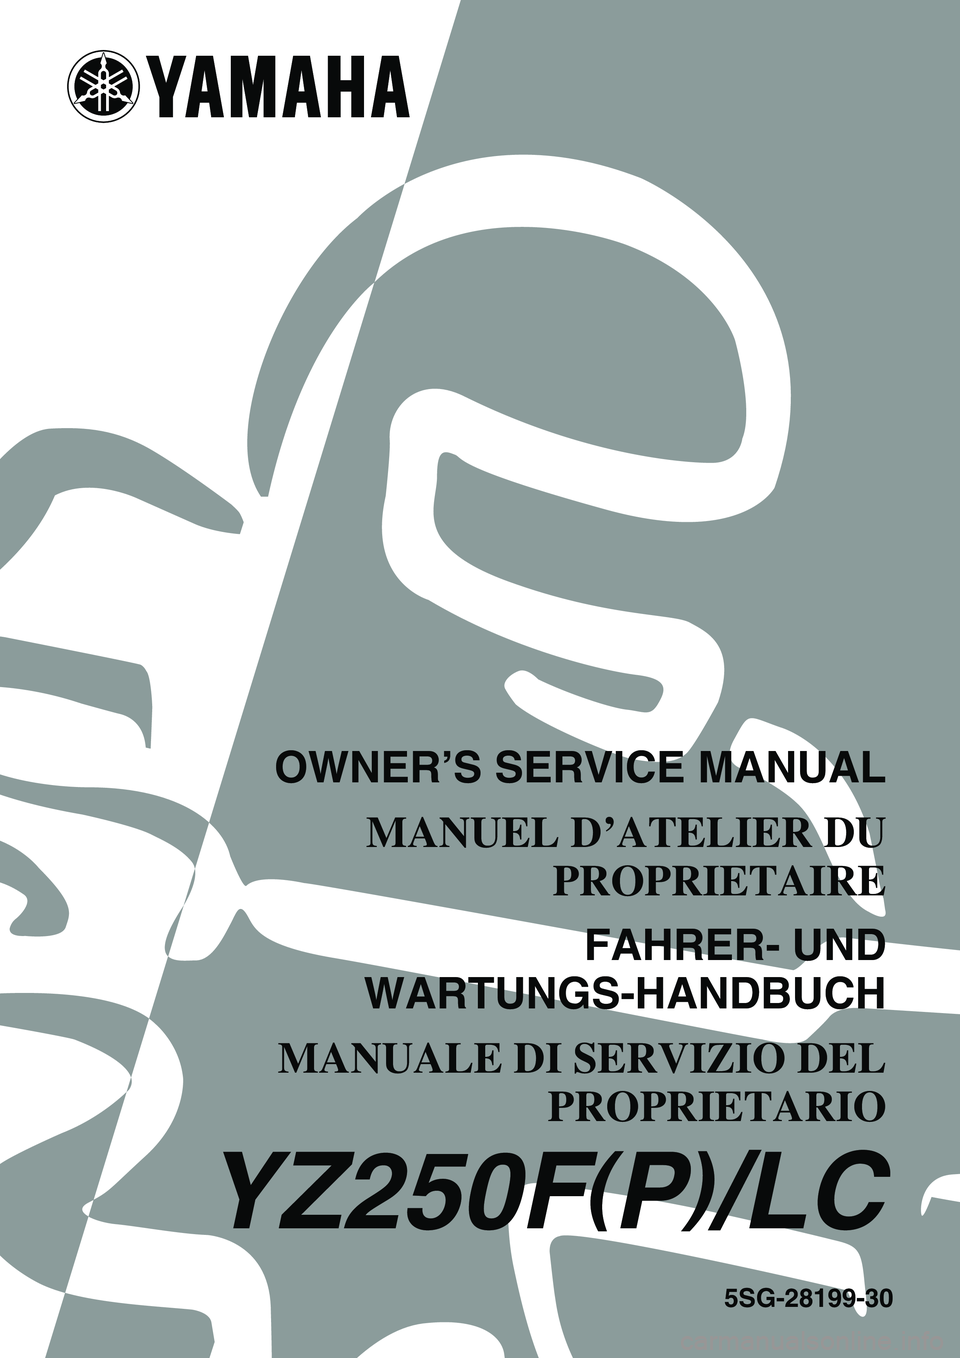 YAMAHA YZ250F 2002  Owners Manual 5SG-28199-30
YZ250F(P)/LC
OWNER’S SERVICE MANUAL
MANUEL D’ATELIER DU
PROPRIETAIRE
FAHRER- UND
WARTUNGS-HANDBUCH
MANUALE DI SERVIZIO DEL
PROPRIETARIO 